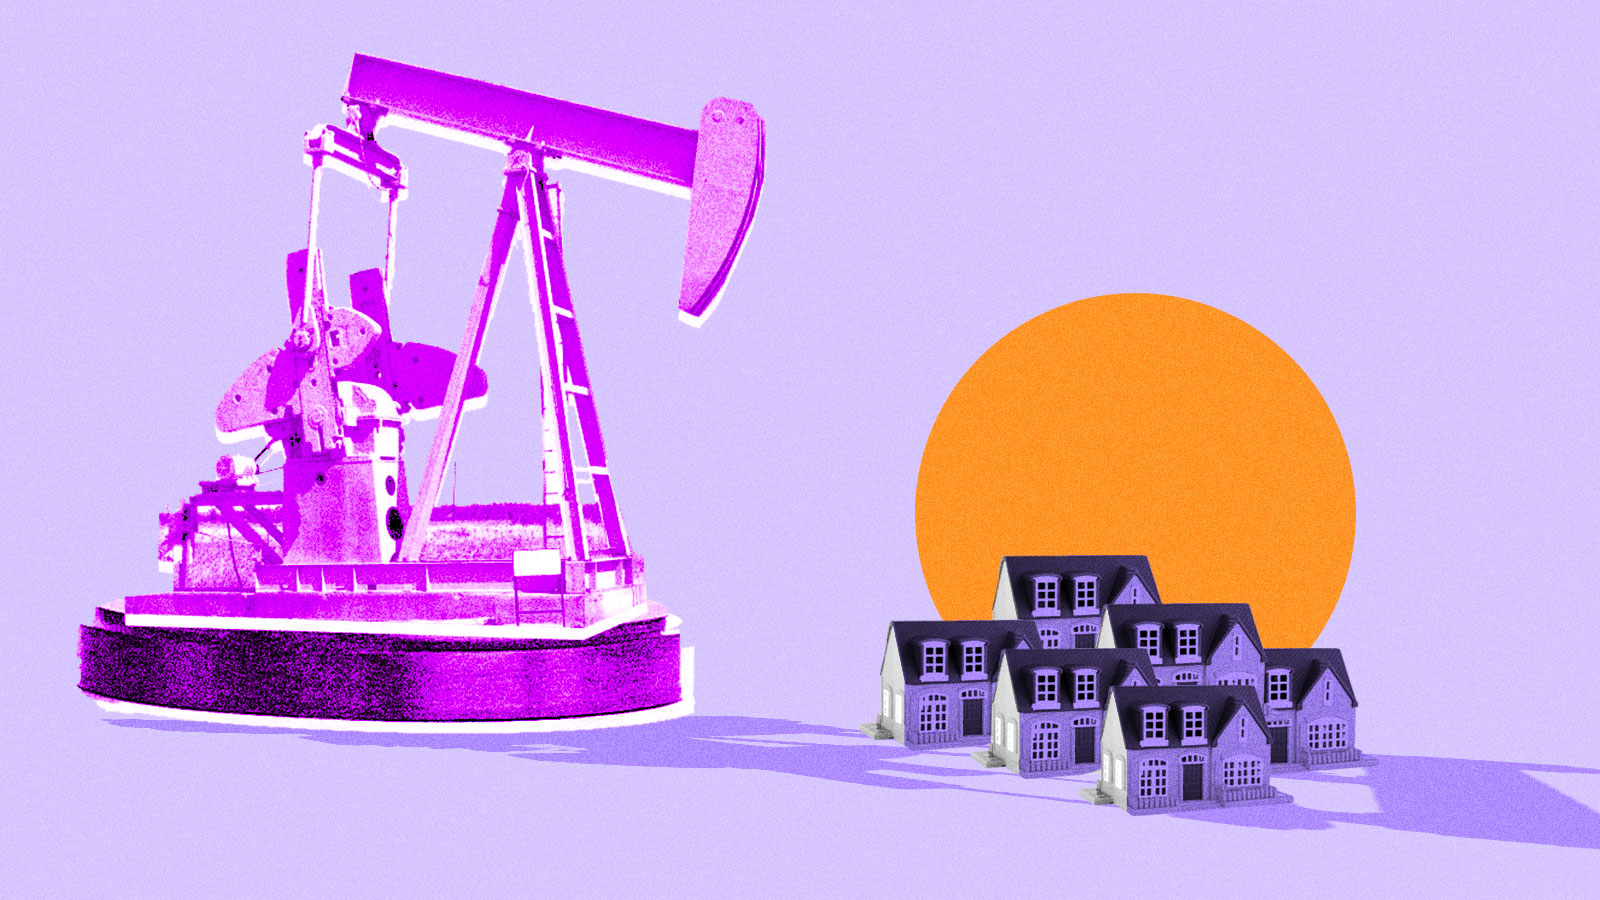 Collage: an oil pumpjack casting a shadow over a cluster of small houses